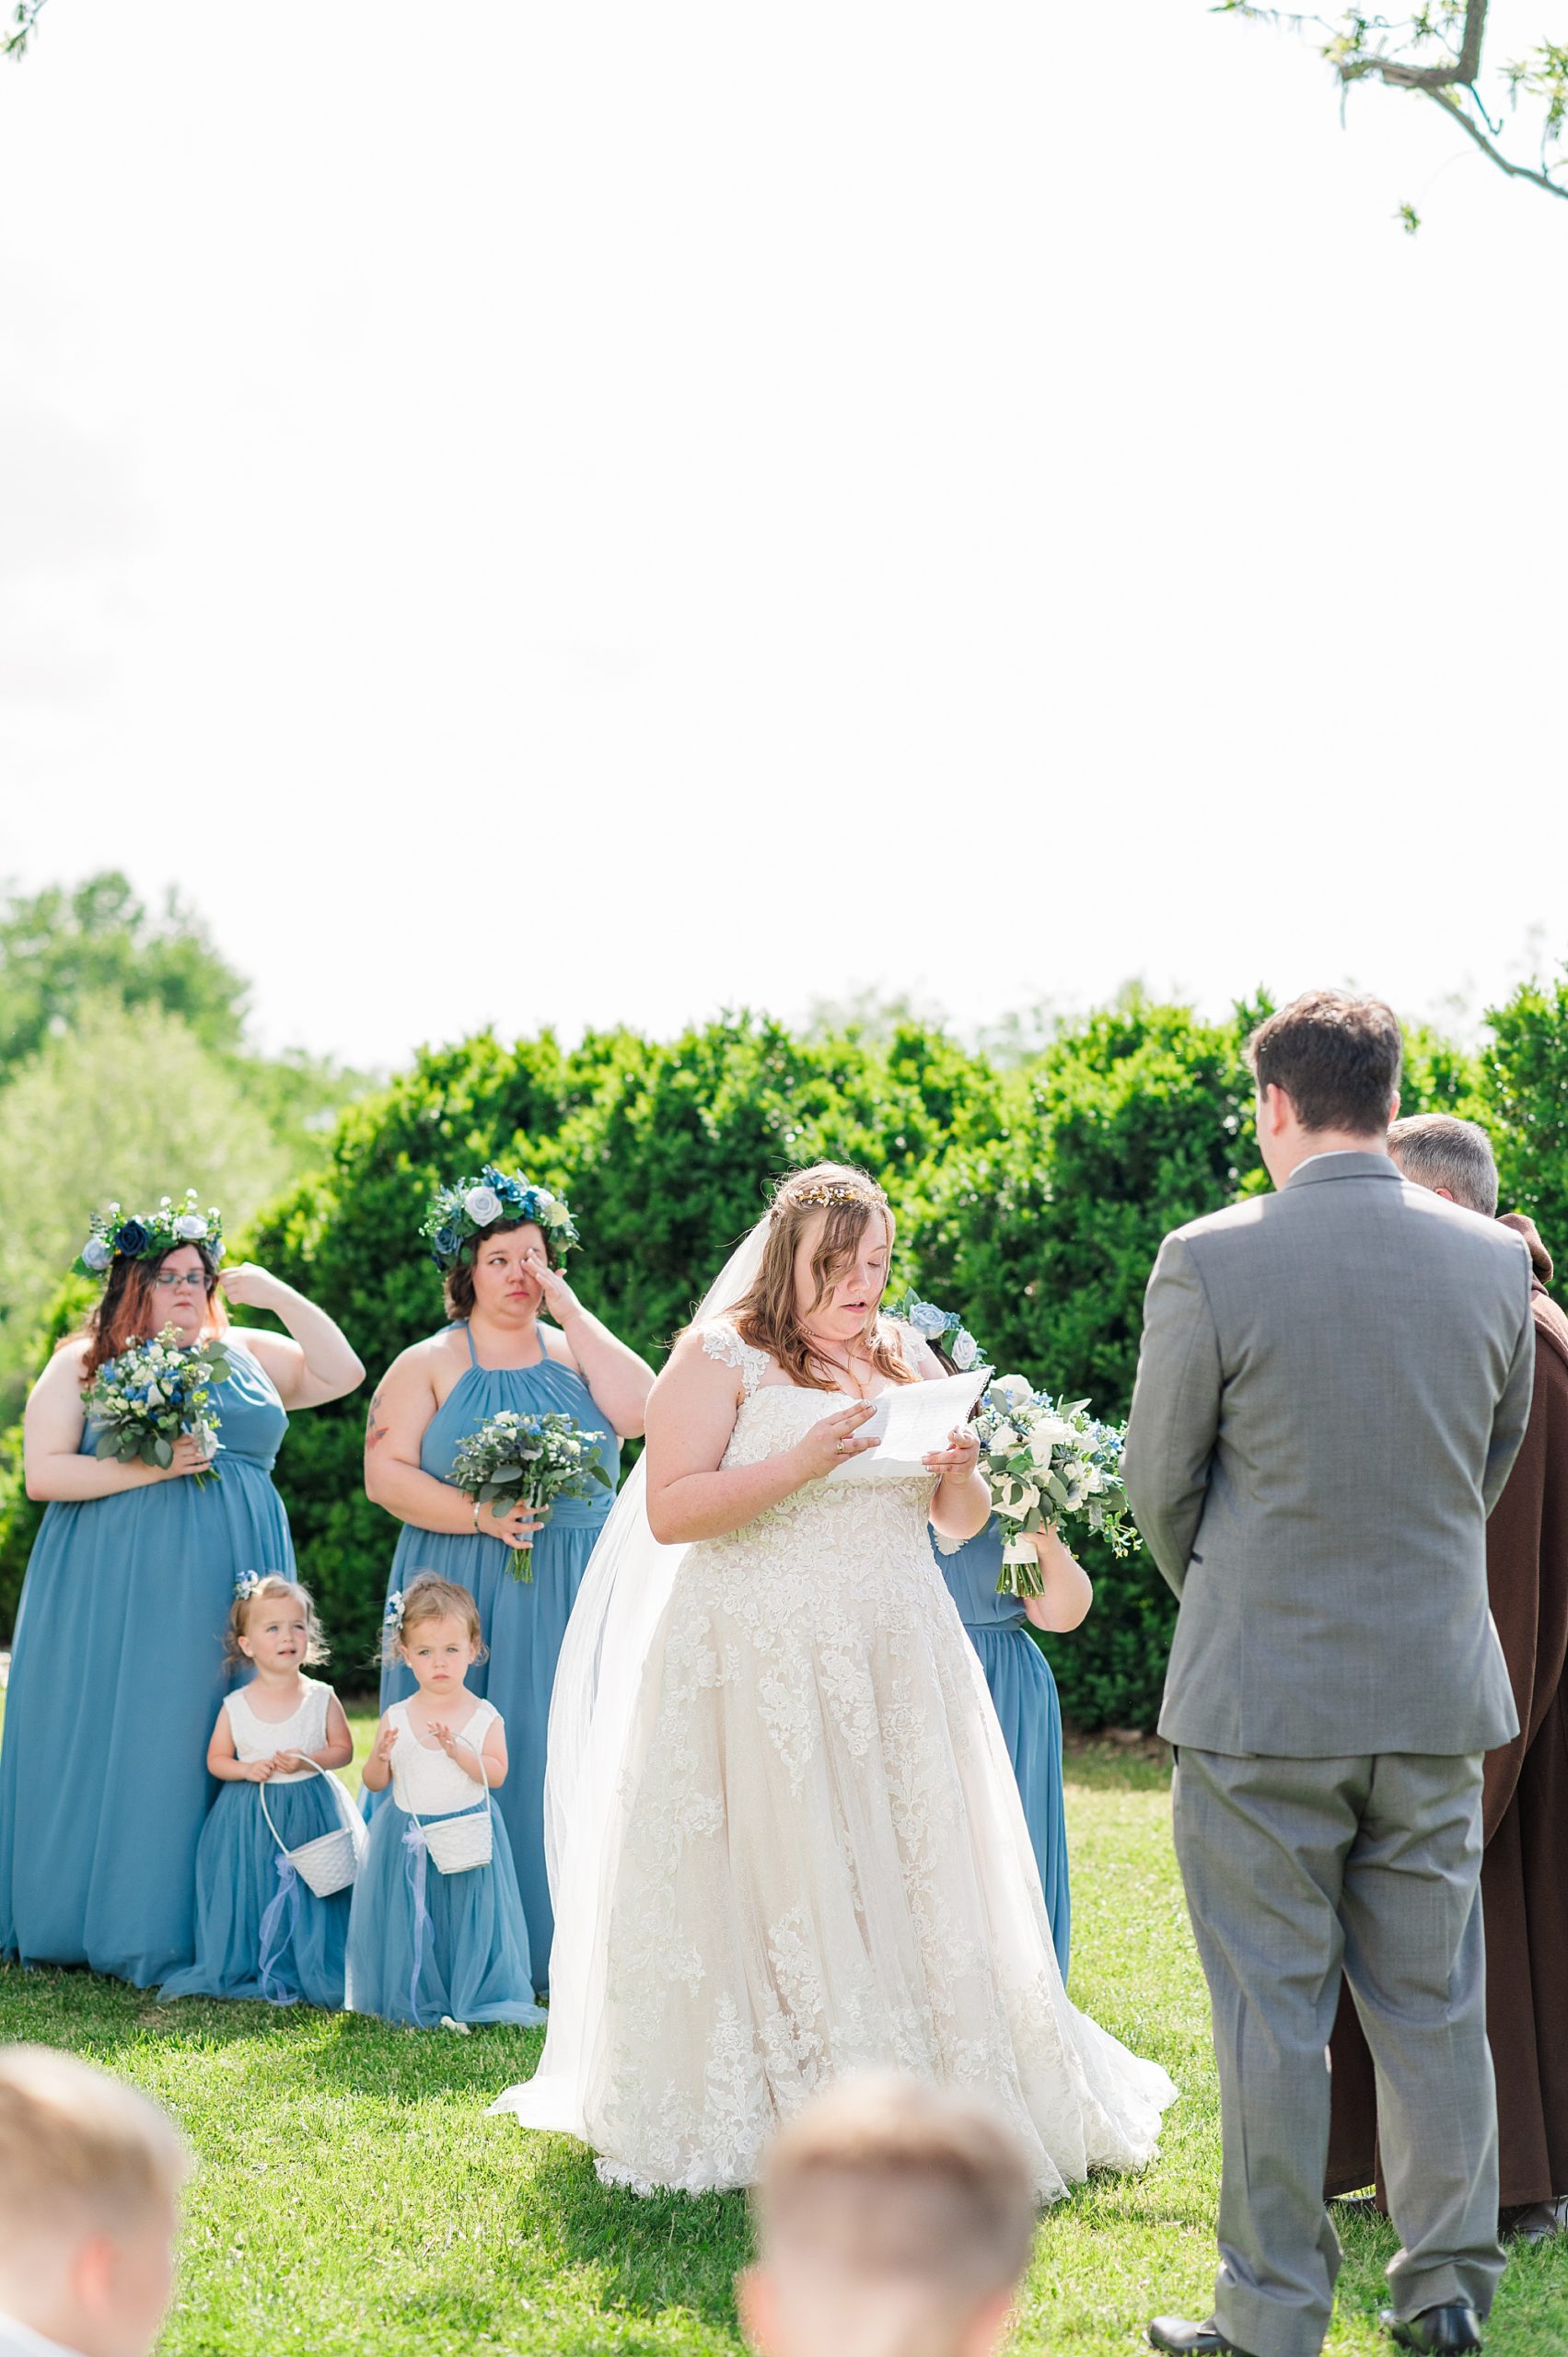 Outdoor Wedding Ceremony at Wedding at Wolftrap Farm. Wedding Photography by Kailey Brianne Photography